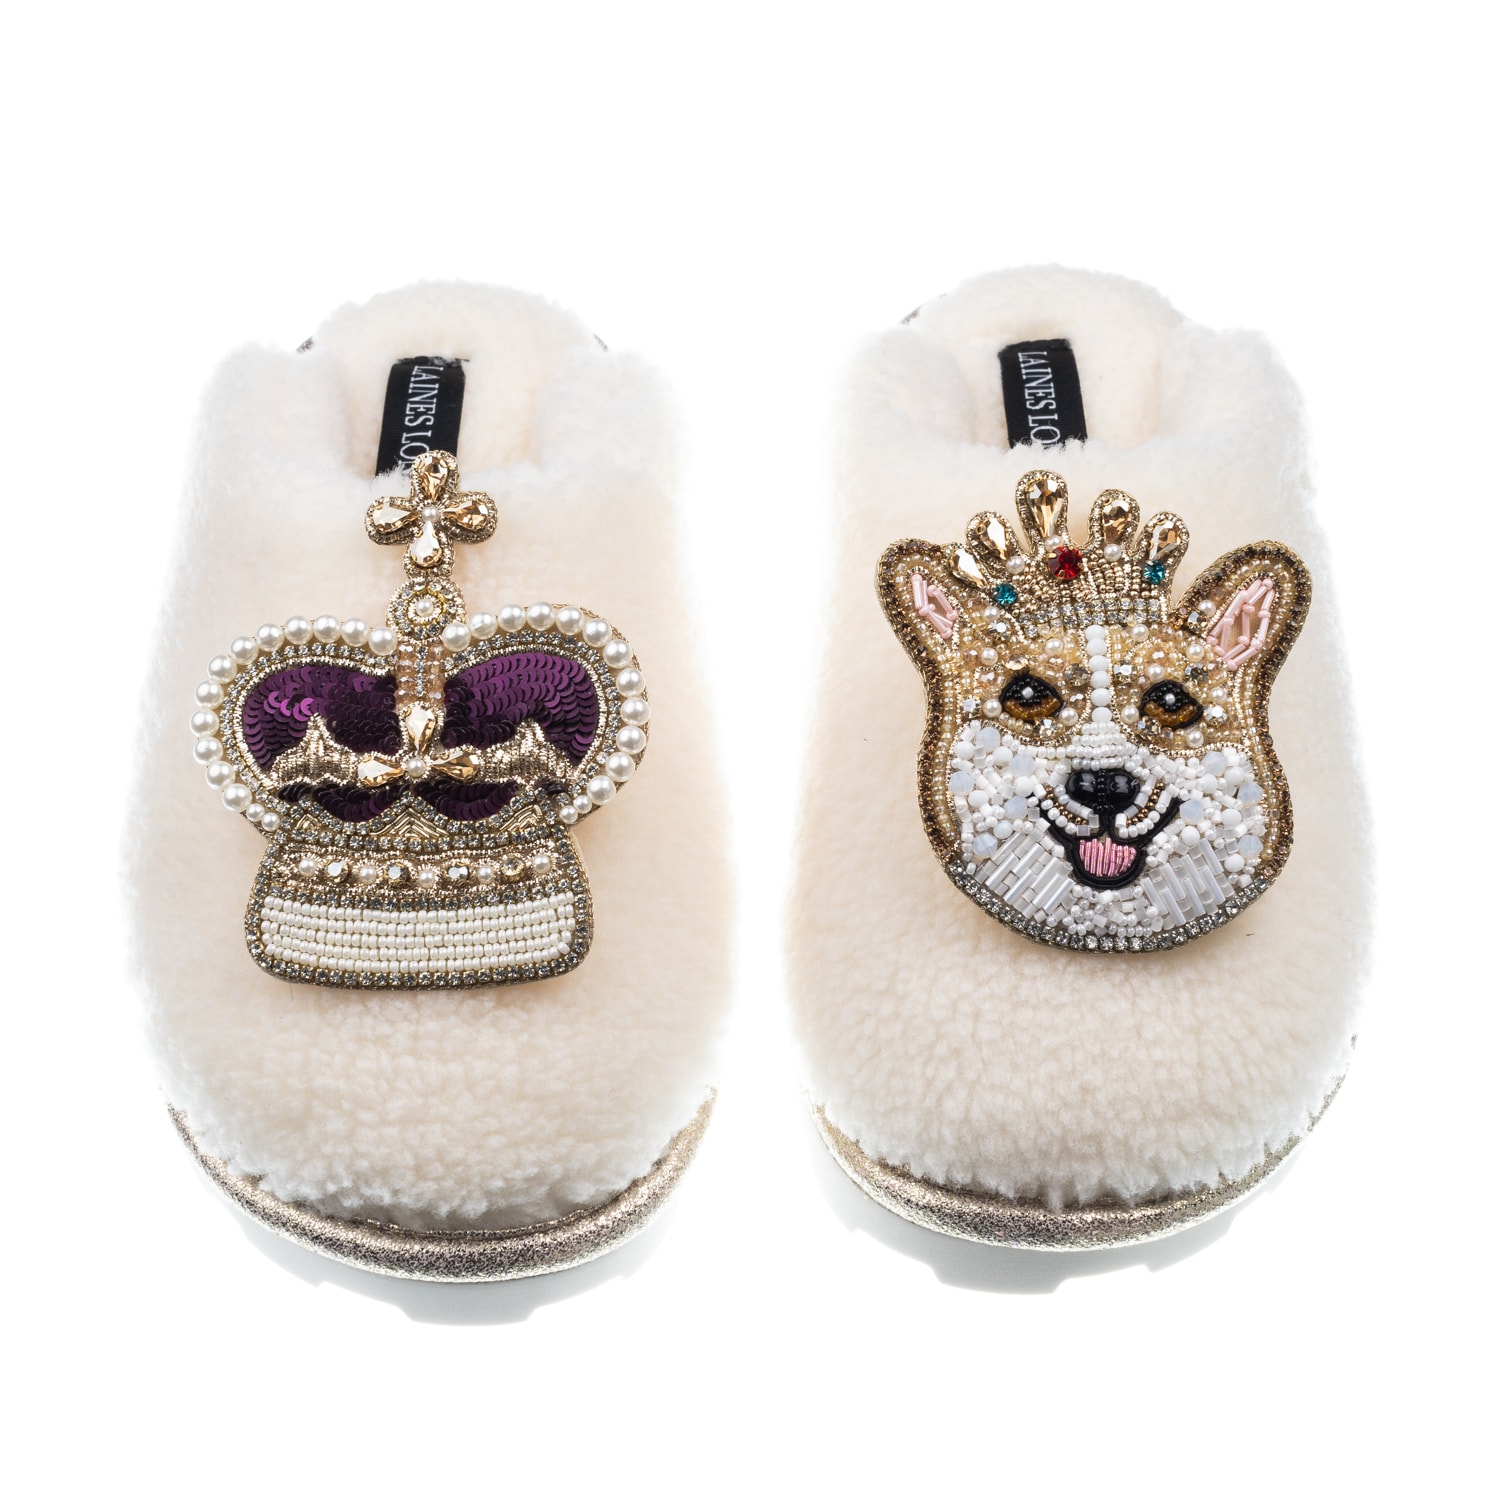 Laines London Women's White Teddy Closed Toe Slippers With Corgi & Crown Brooches - Cream